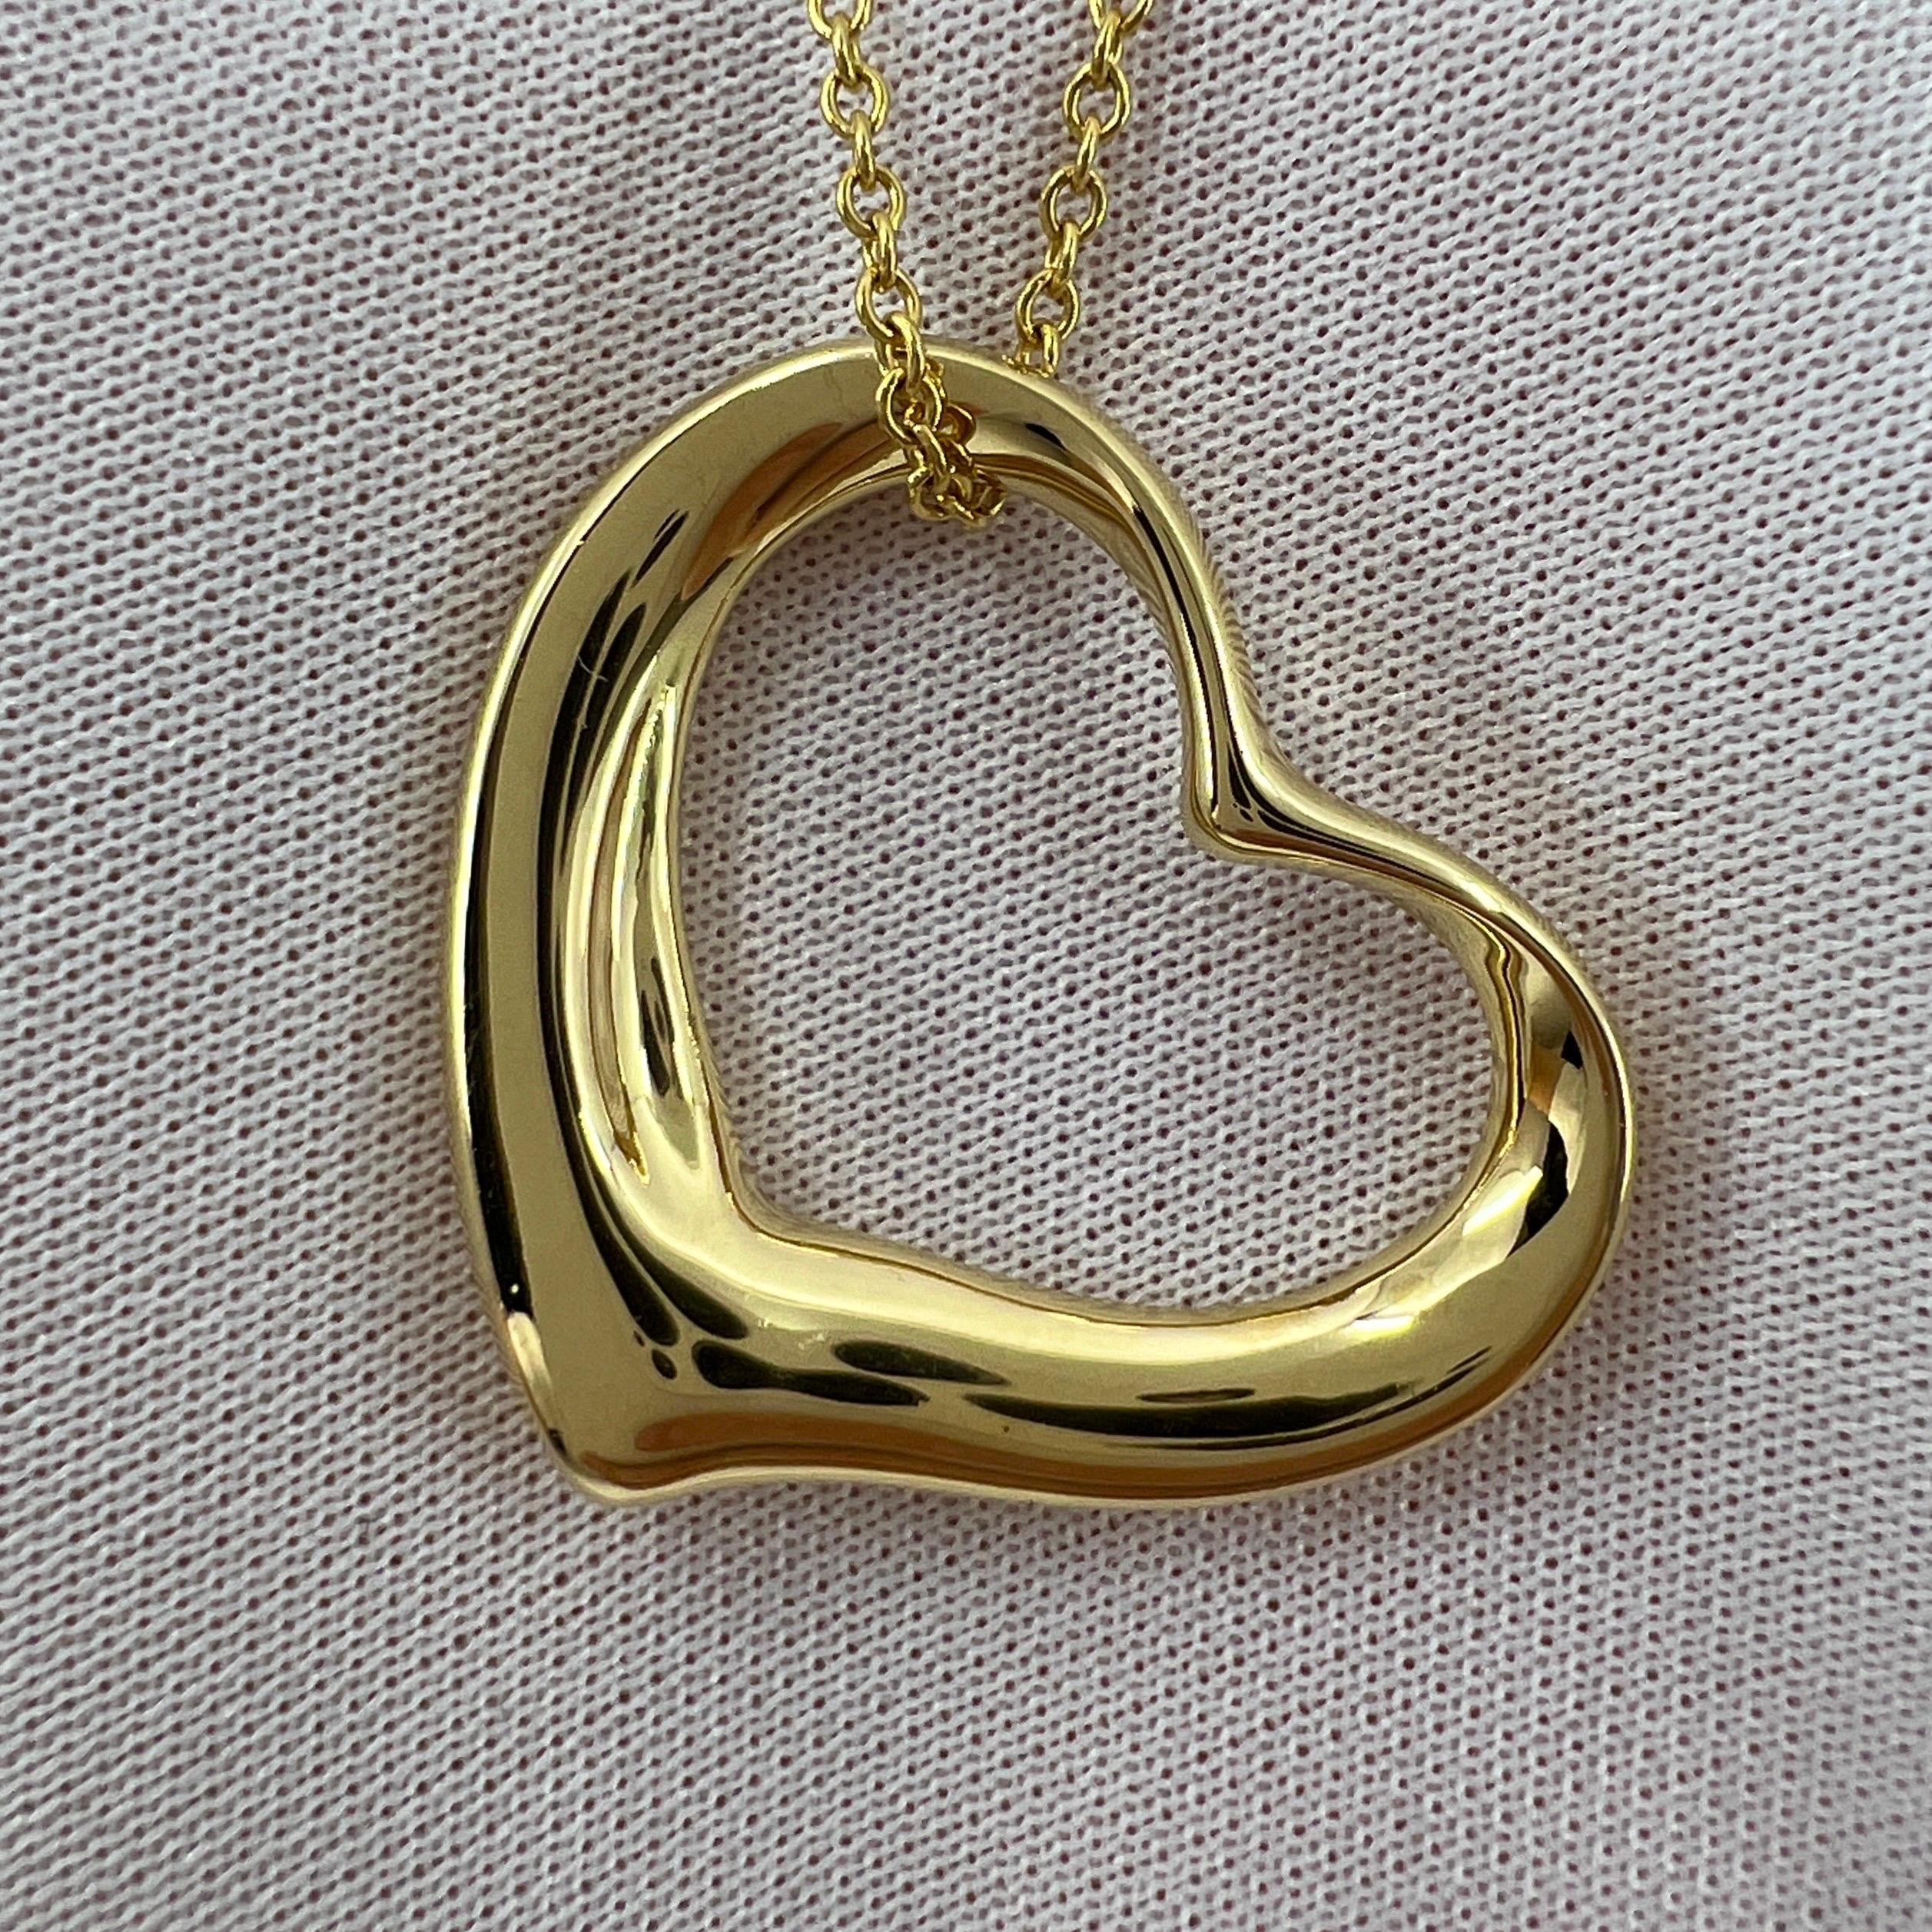 Tiffany & Co. Elsa Peretti Extra Large Open Heart 18k Gold Pendant Necklace For Sale 6